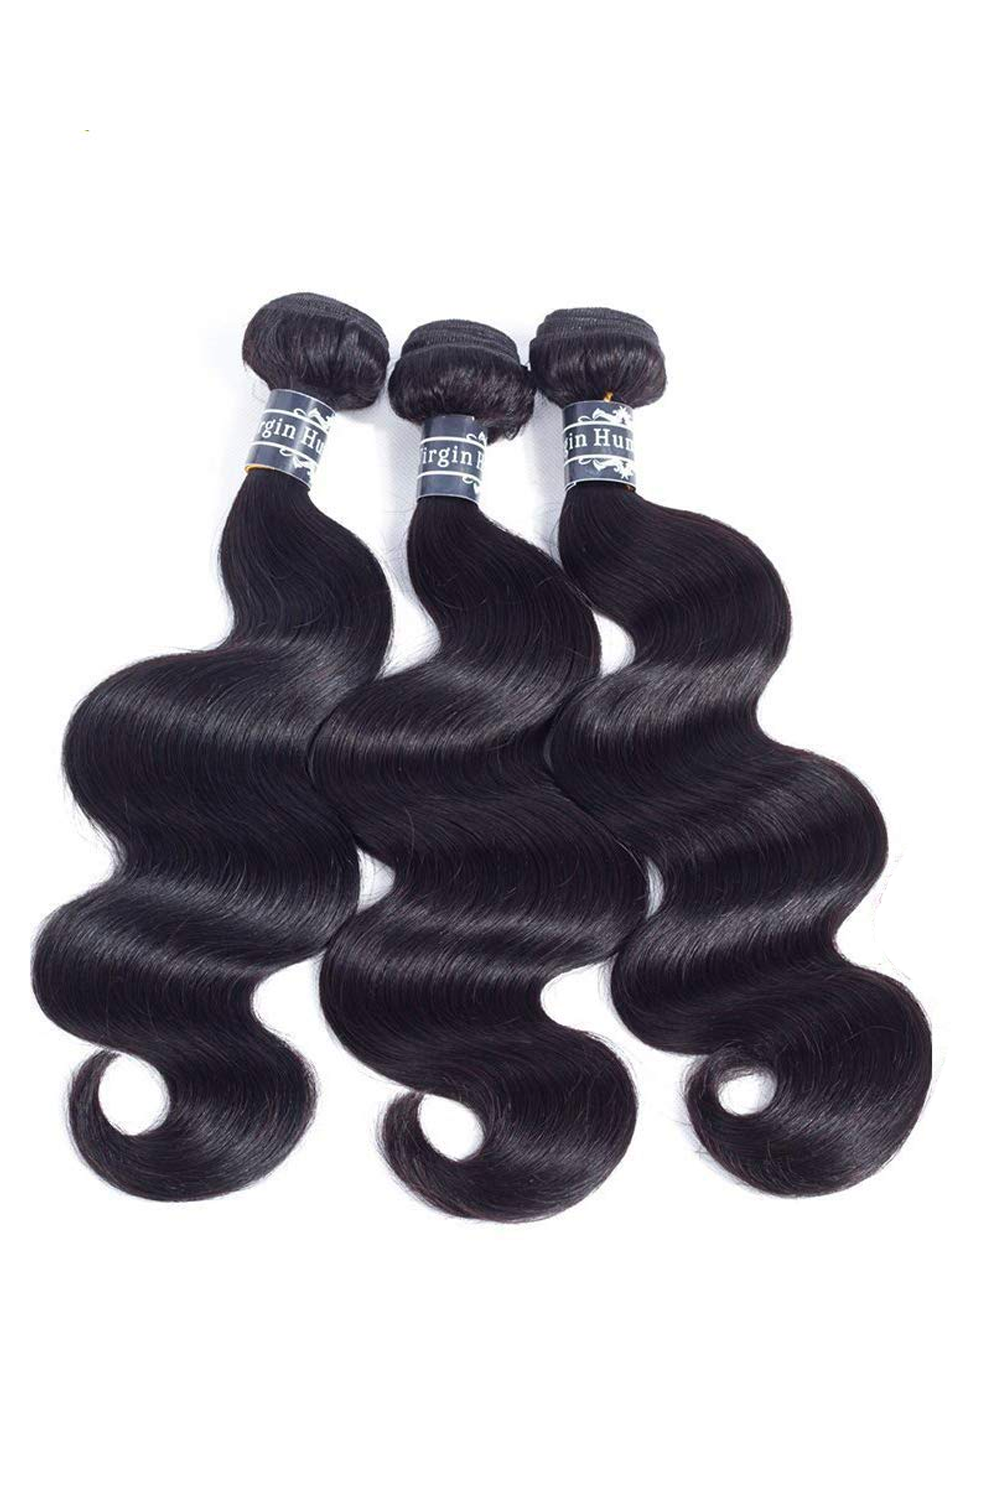 4 Best Body Wave Hair Extensions Of 2022 According To Hairstylists